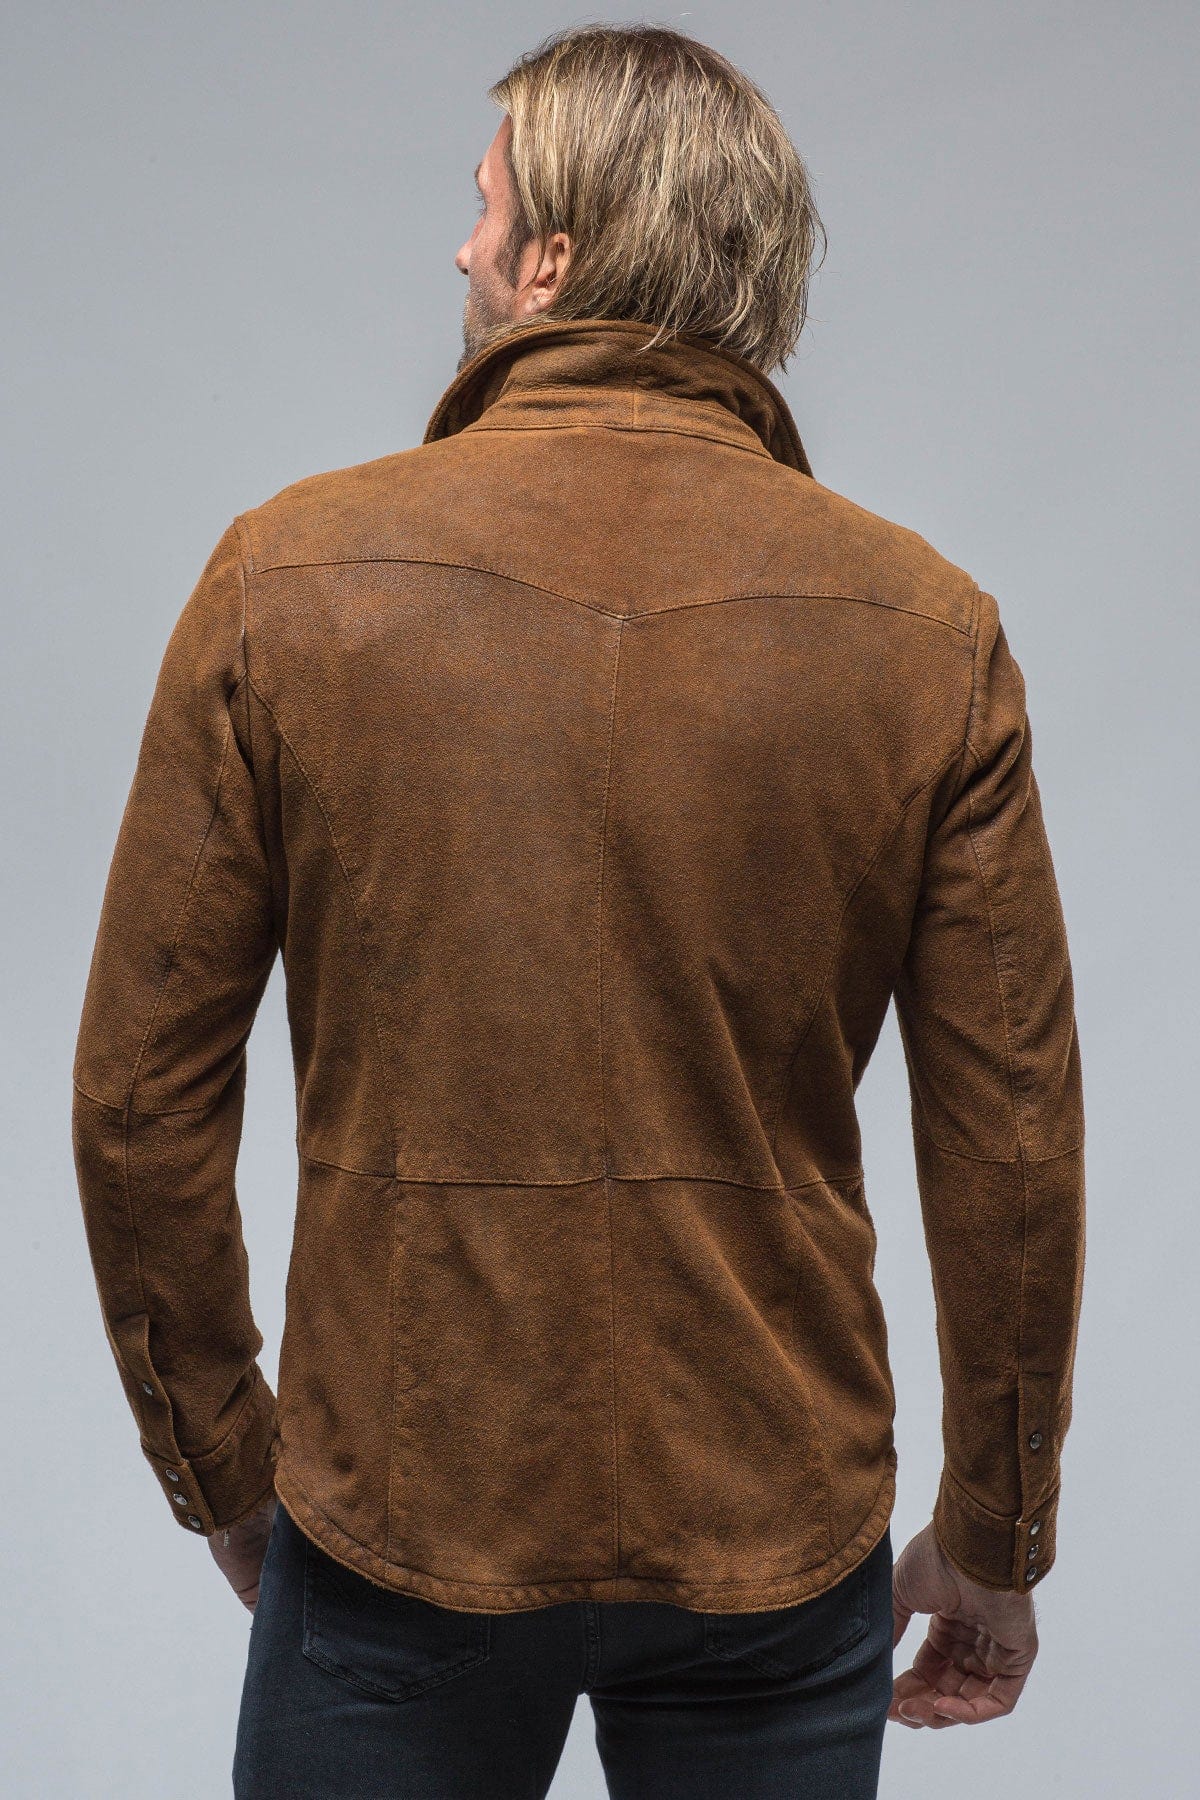 Rip Western Shirt In Rust - AXEL'S